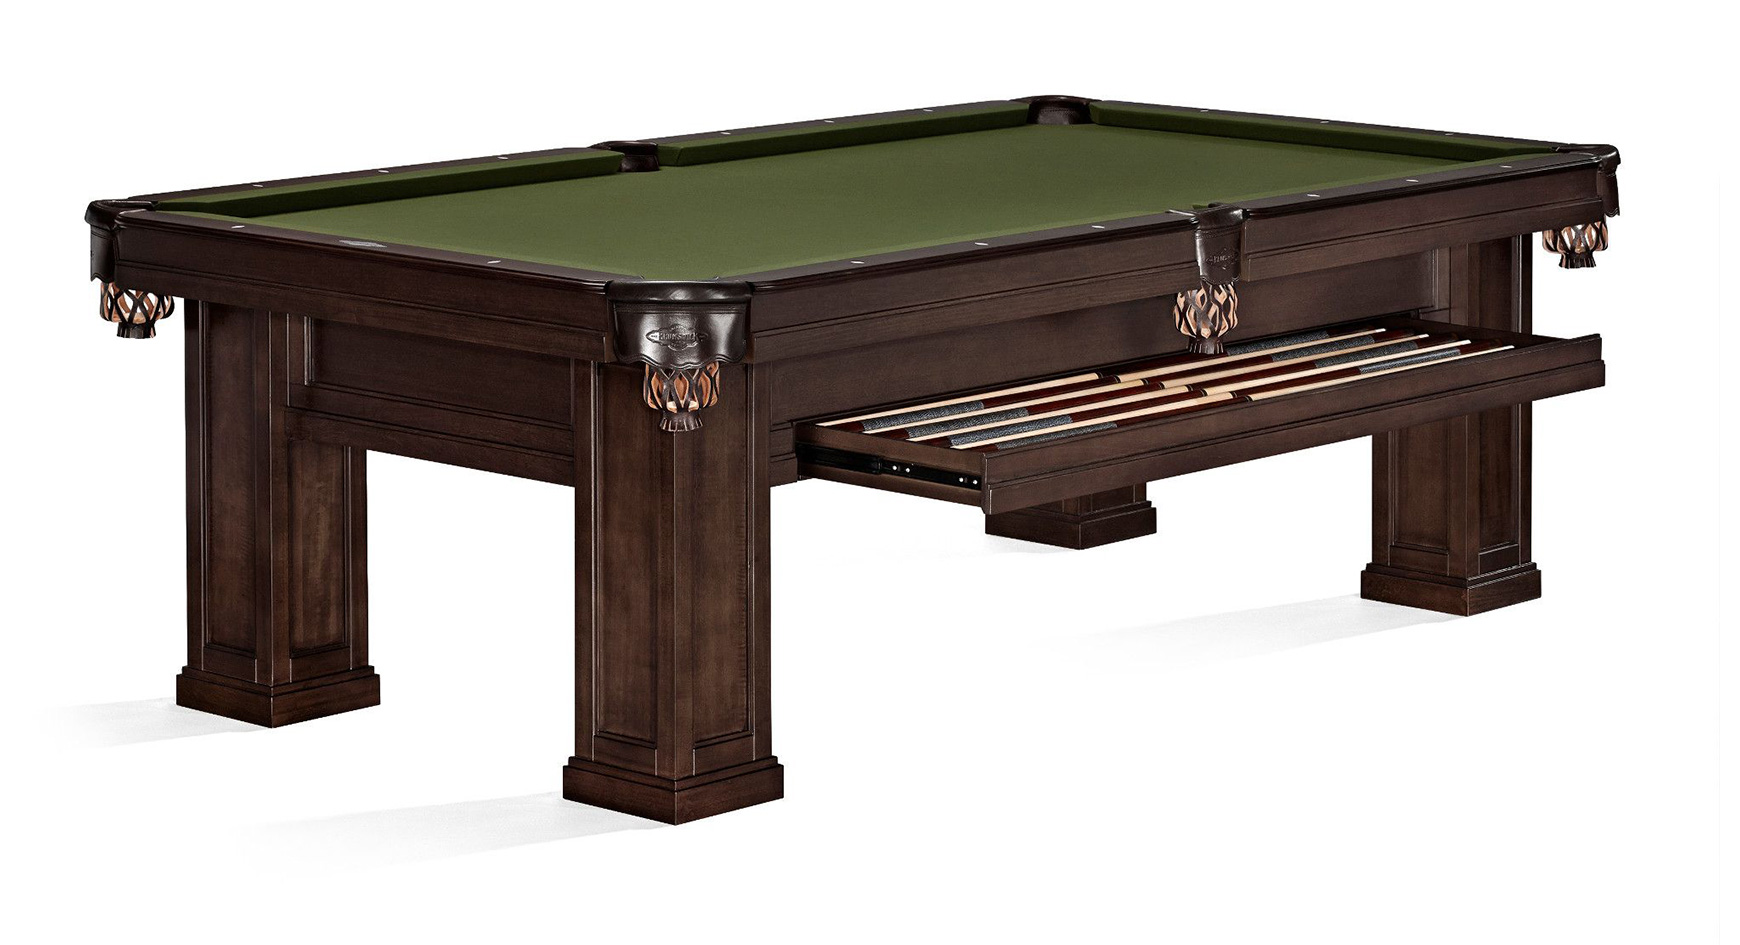 8ft pool tables for sale